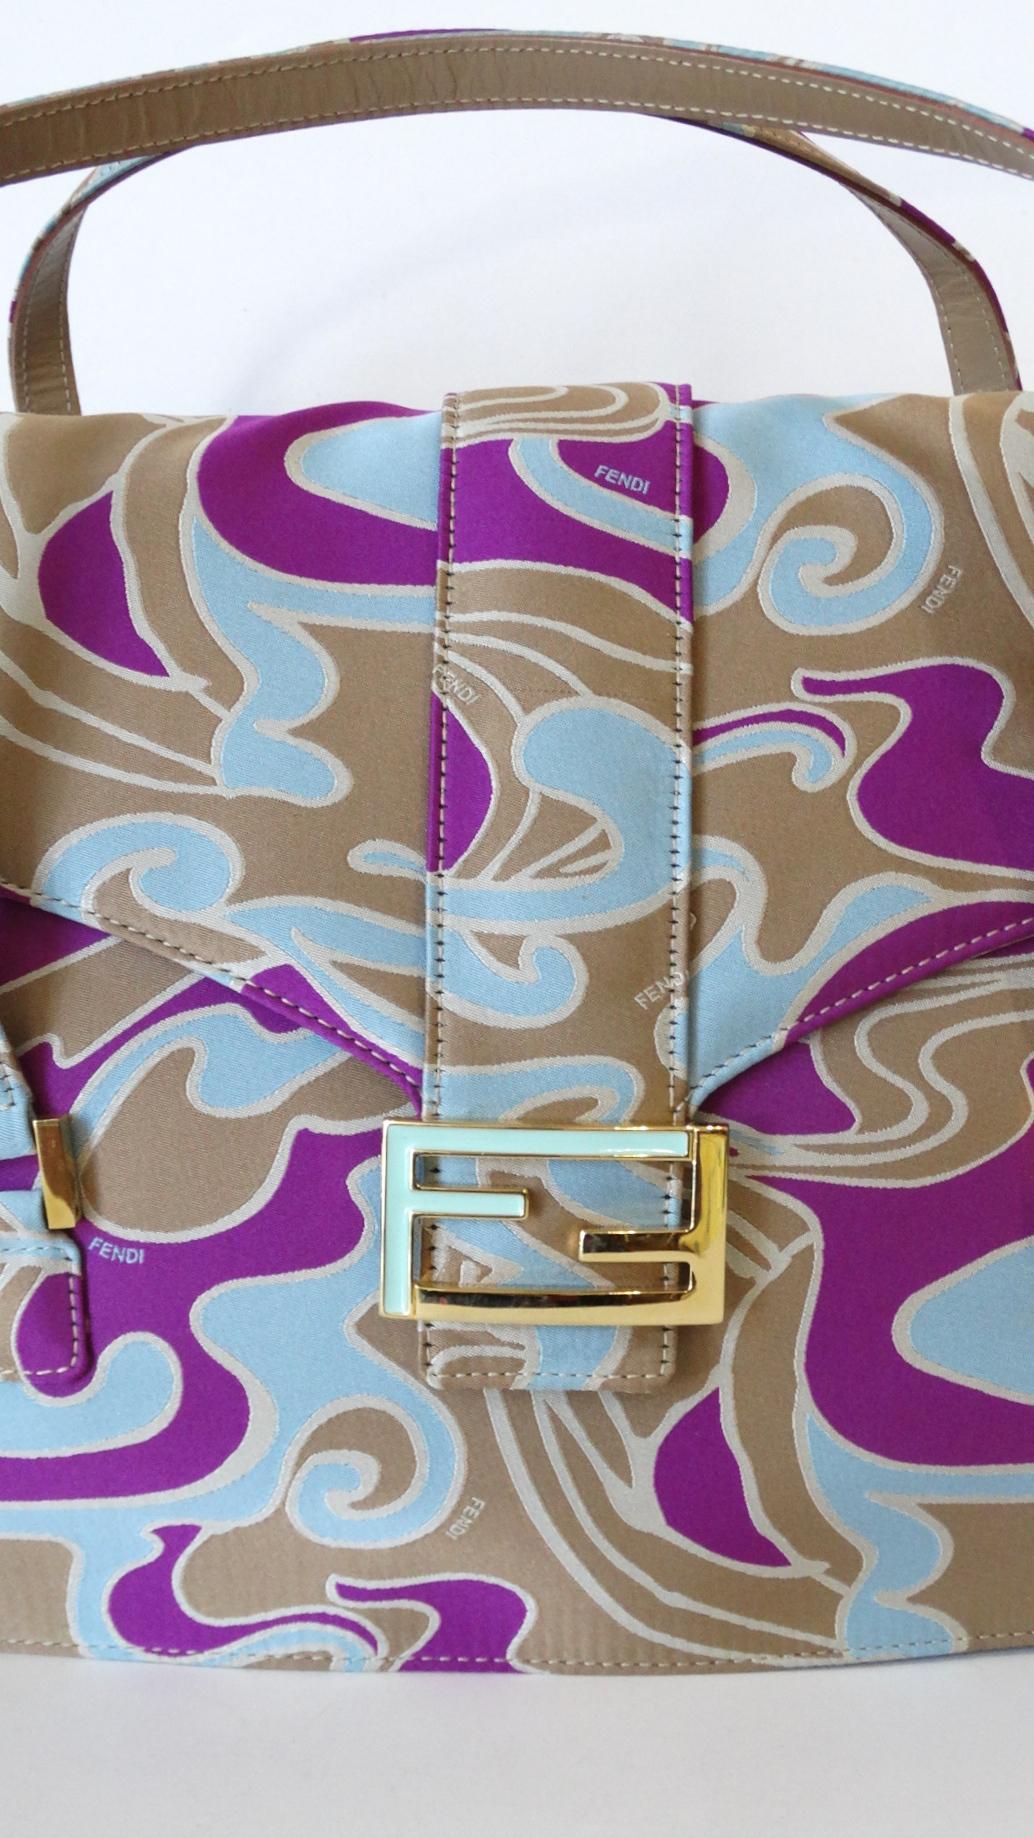 The Fendi flap bag is back! Rock a unique piece of your own with our incredible Fendi psychedelic swirl bag circa 2000s! Structured rectangular shape, covered in a soft canvas material. Printed all over in unique swirling pattern, in shades of